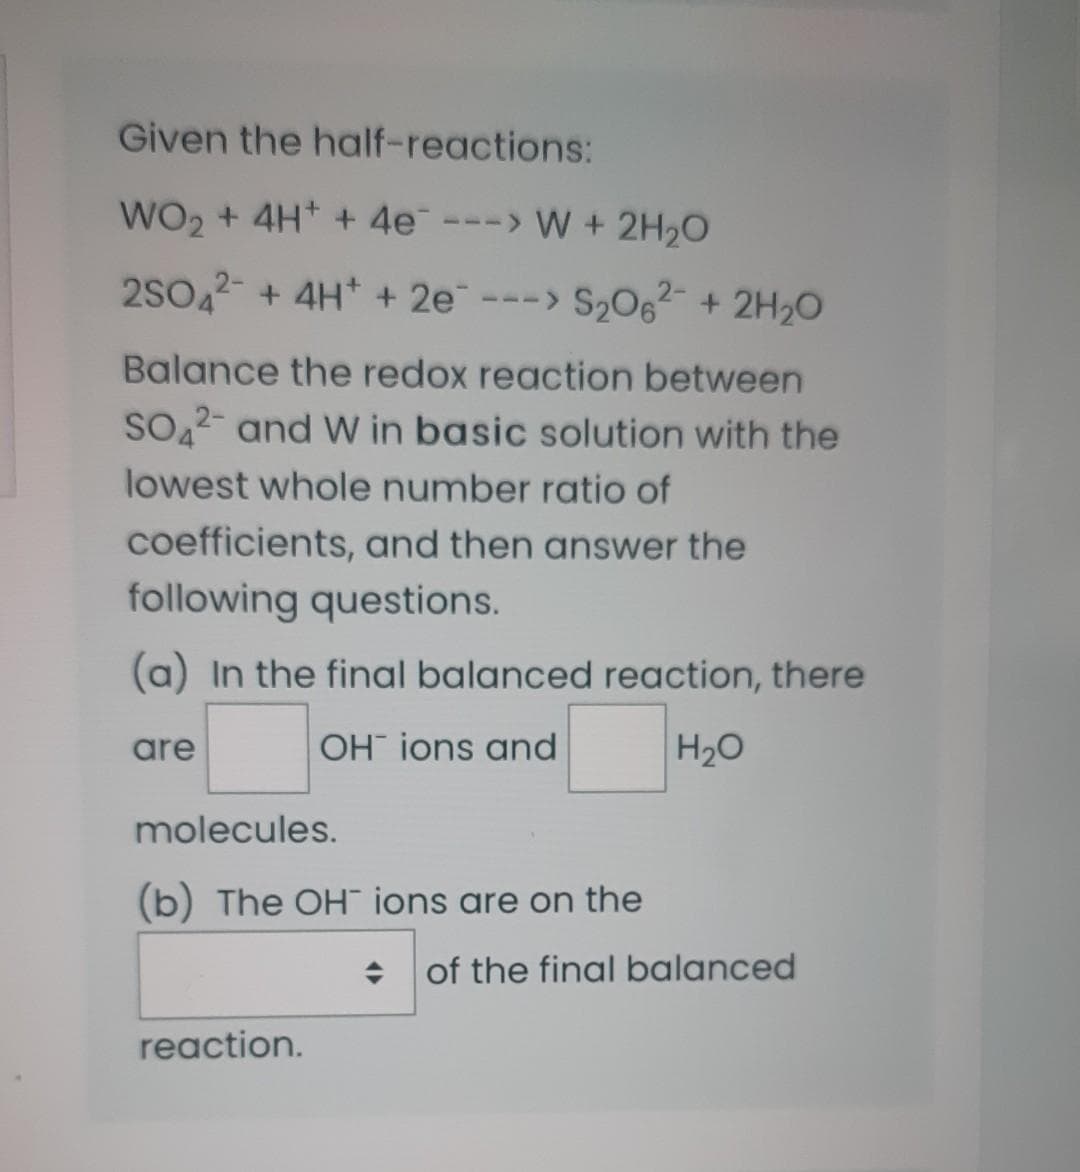 Given the half-reactions:
WO₂ + 4H+ + 4e ---> W + 2H₂O
2SO4 + 4H+ + 2e-
---> S₂06² + 2H₂O
Balance the redox reaction between
SO2- and W in basic solution with the
lowest whole number ratio of
coefficients, and then answer the
following questions.
(a) In the final balanced reaction, there
OH ions and
H₂O
are
molecules.
(b) The OH ions are on the
reaction.
of the final balanced